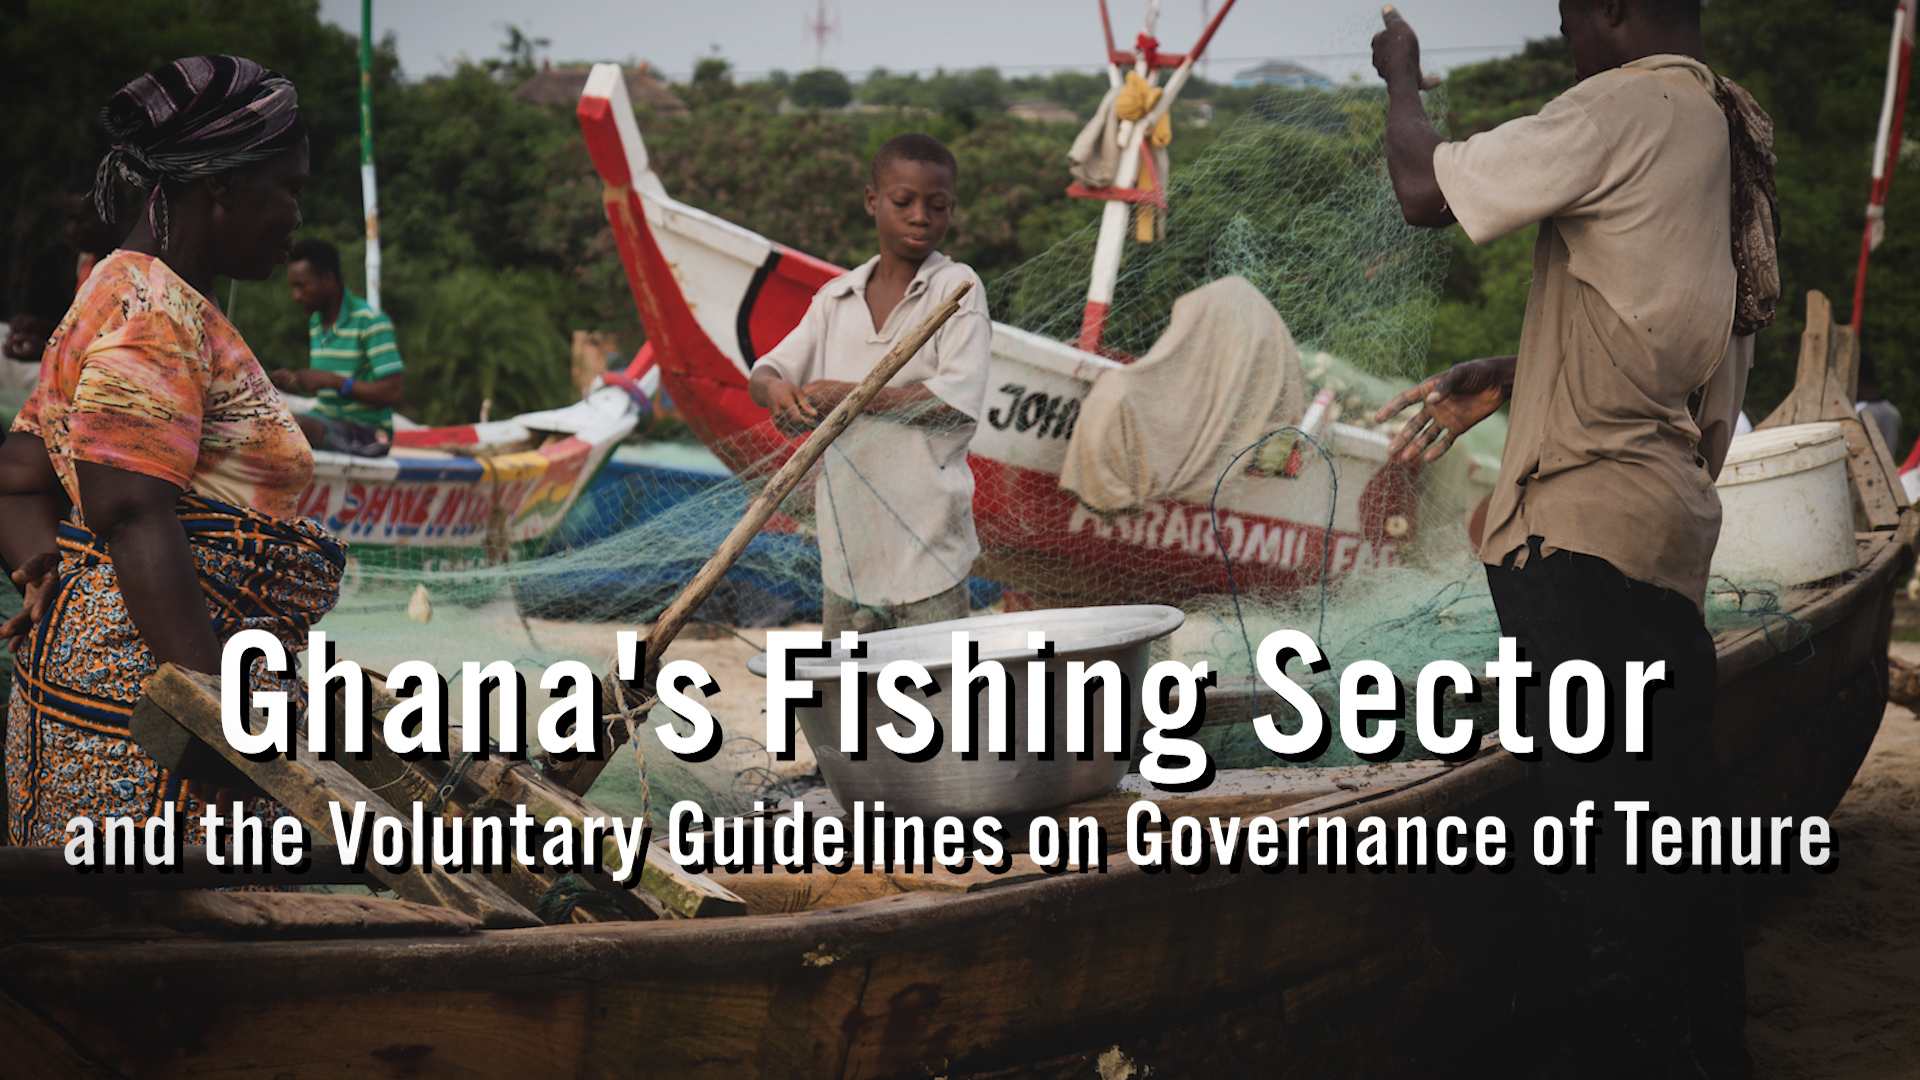 Ghana’s Fishing Sector and the Voluntary Guidelines on Governance of Tenure